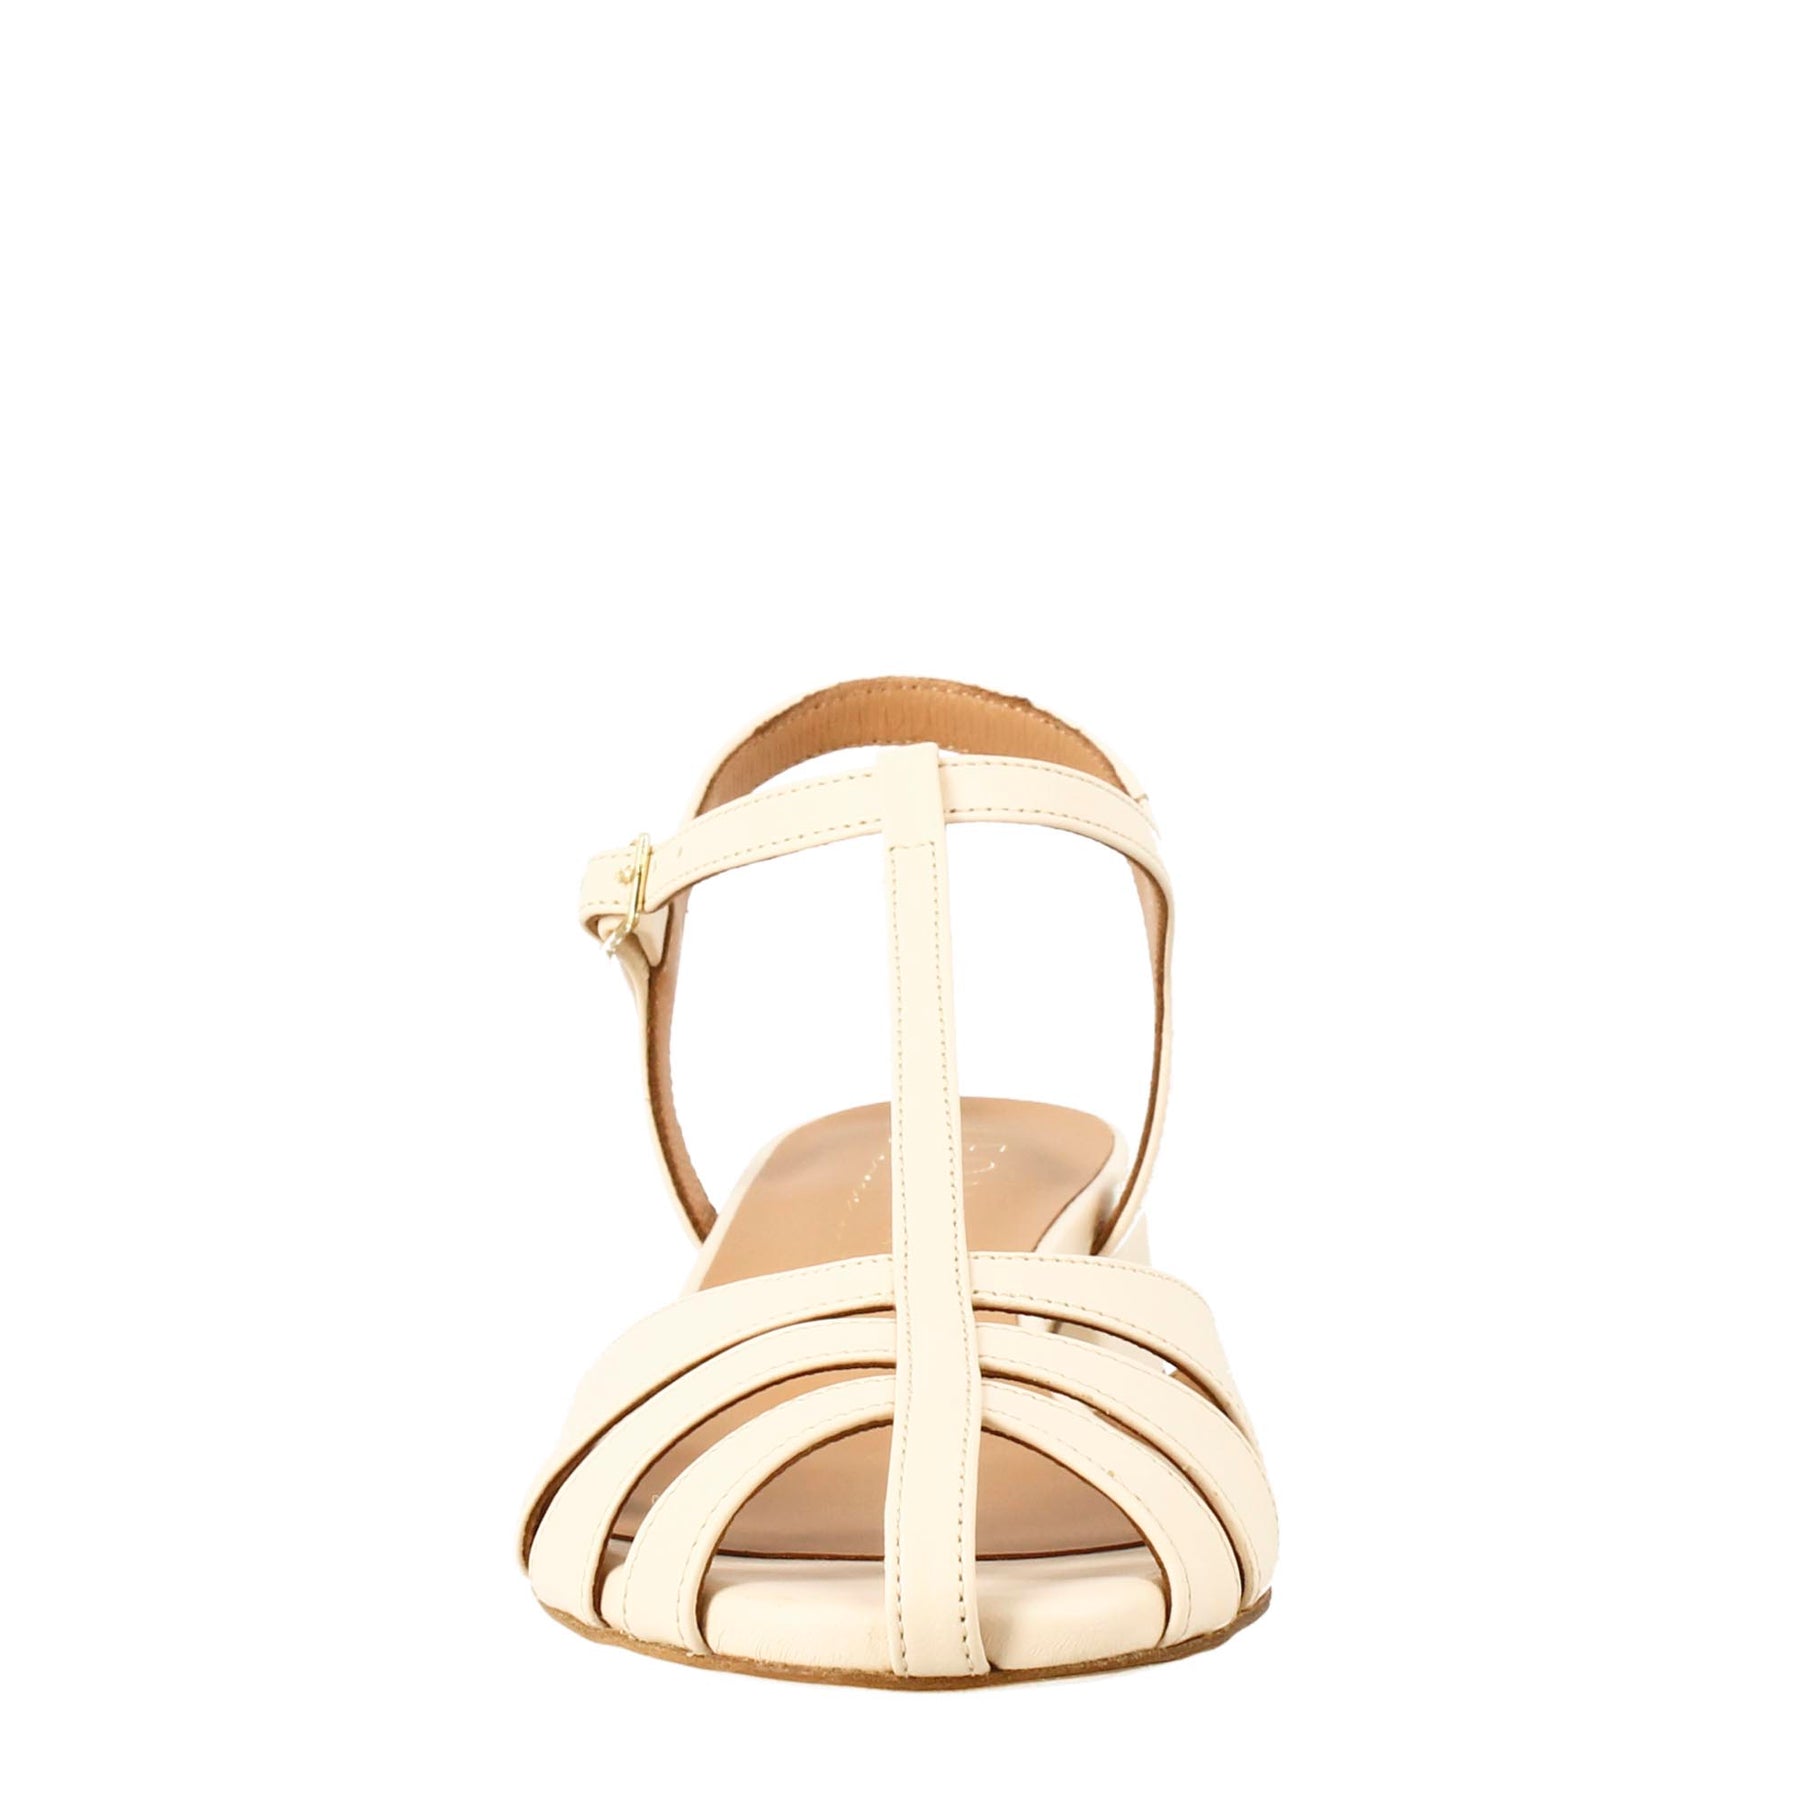 Cage-shaped sandal for women in light pink